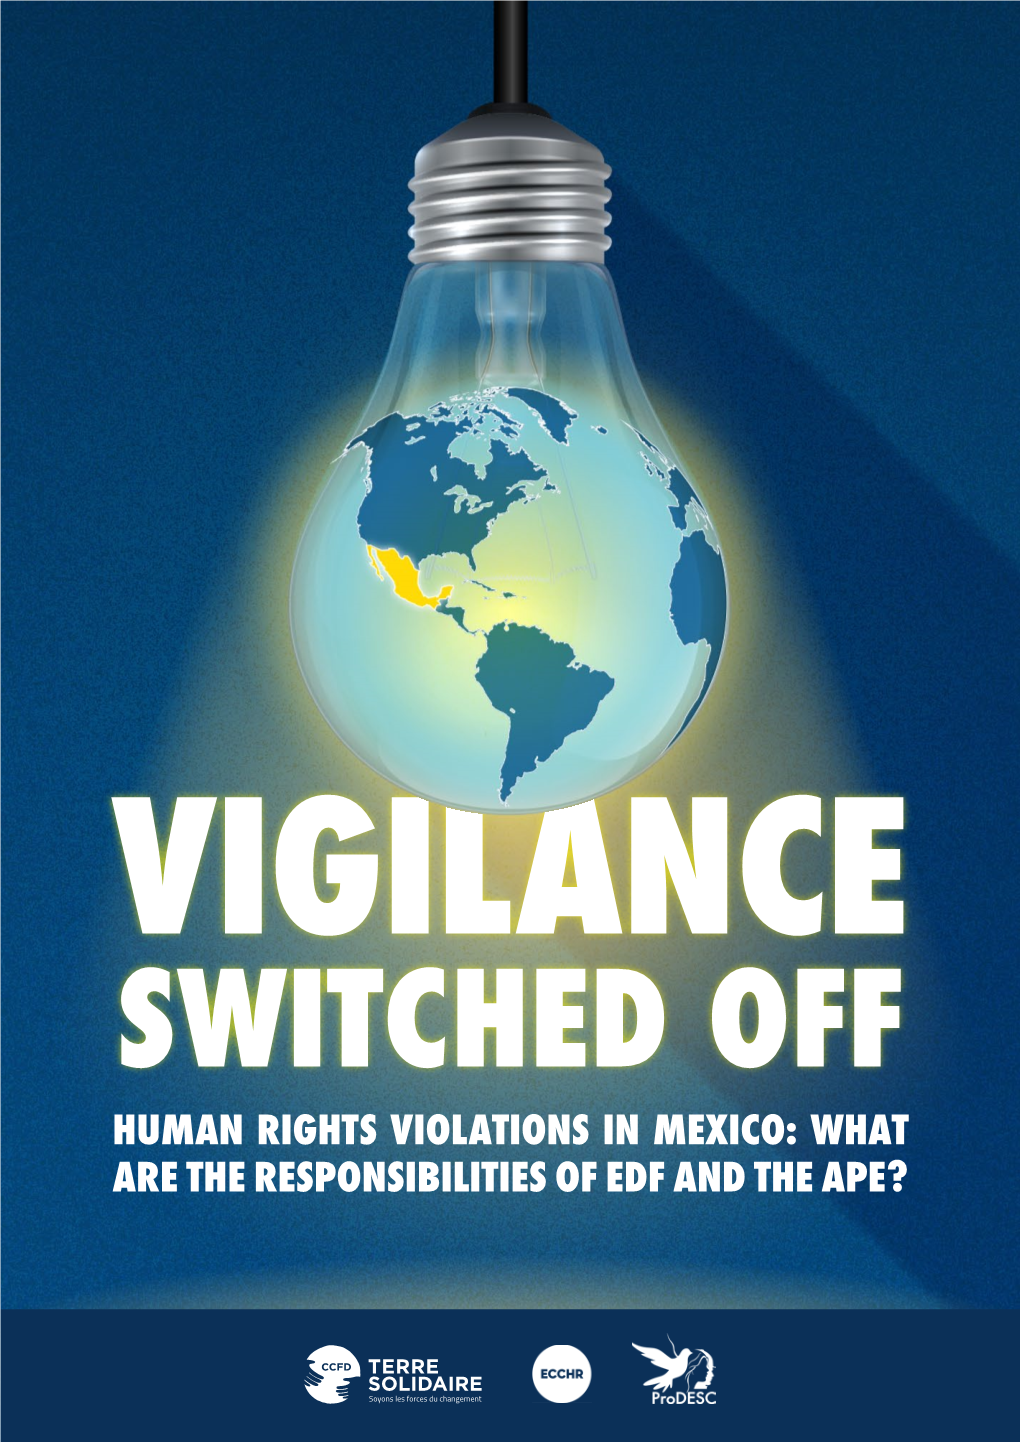 Human Rights Violations in Mexico: What Are the Responsibilities of Edf